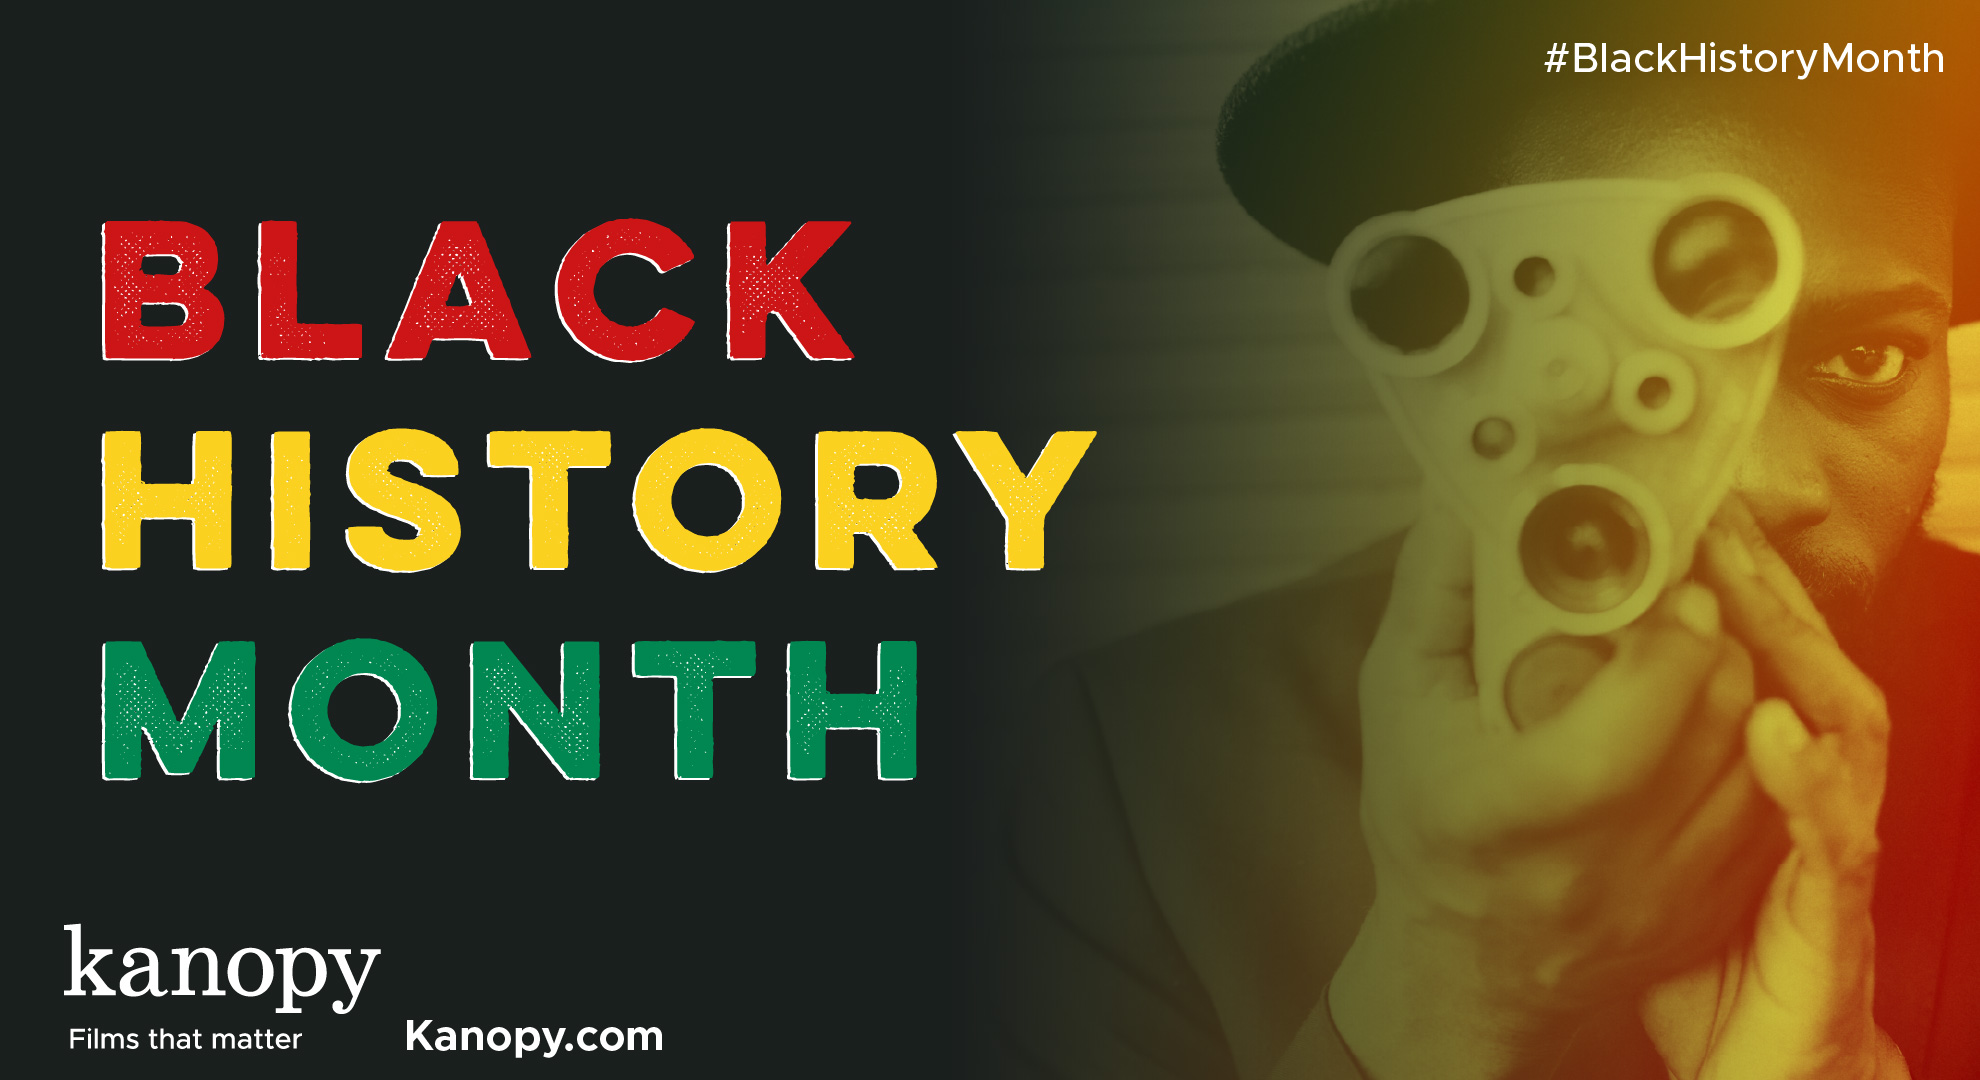 Banner image featuring a black man in a hat holding an old video camera. The words "Black History Month" and Kanopy and overlaid on the image.